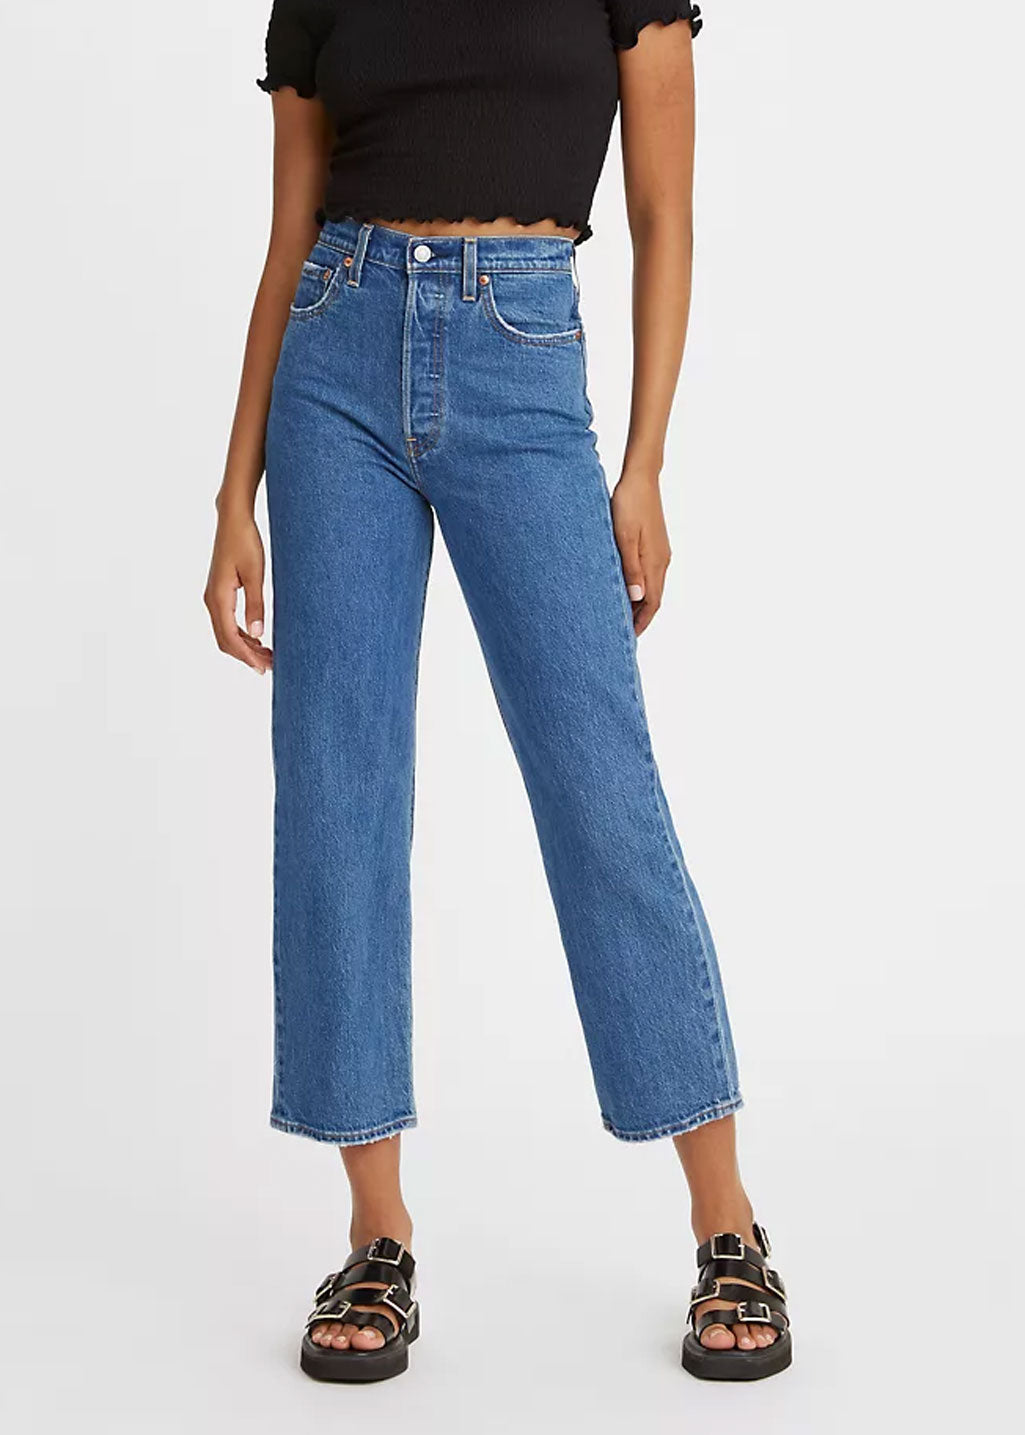 LEVI'S JEANS HAUL: Levi's Ribcage Ankle Straight & 80s Mom Jeans